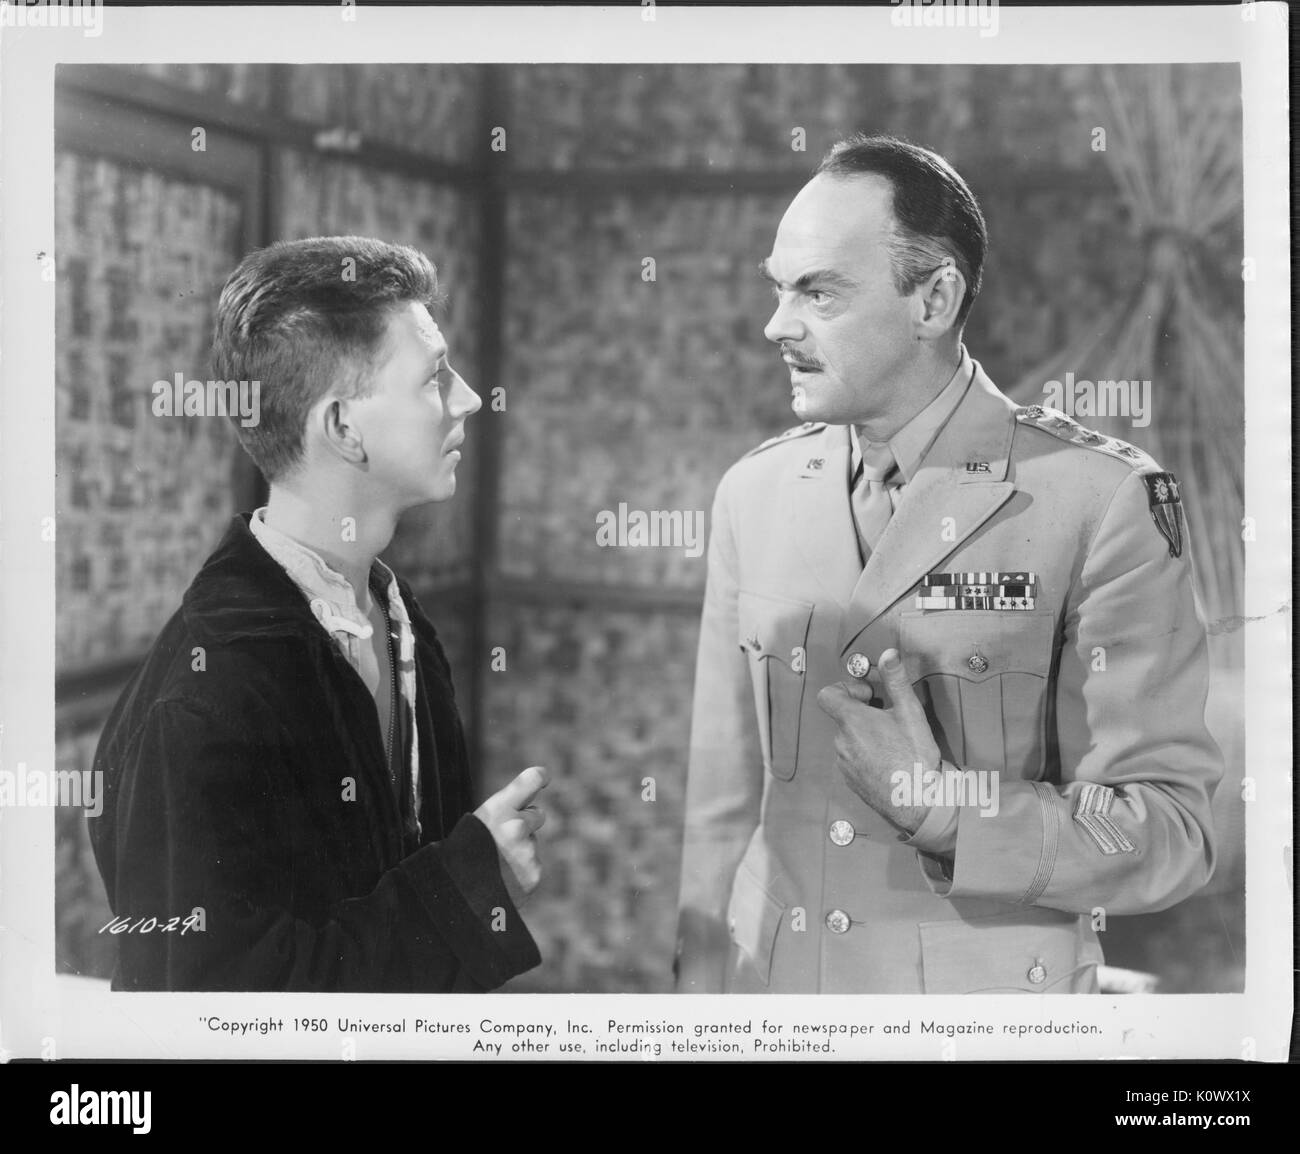 Movie still of Don O'Connor and John McIntire in film Francis, 1950. Stock Photo